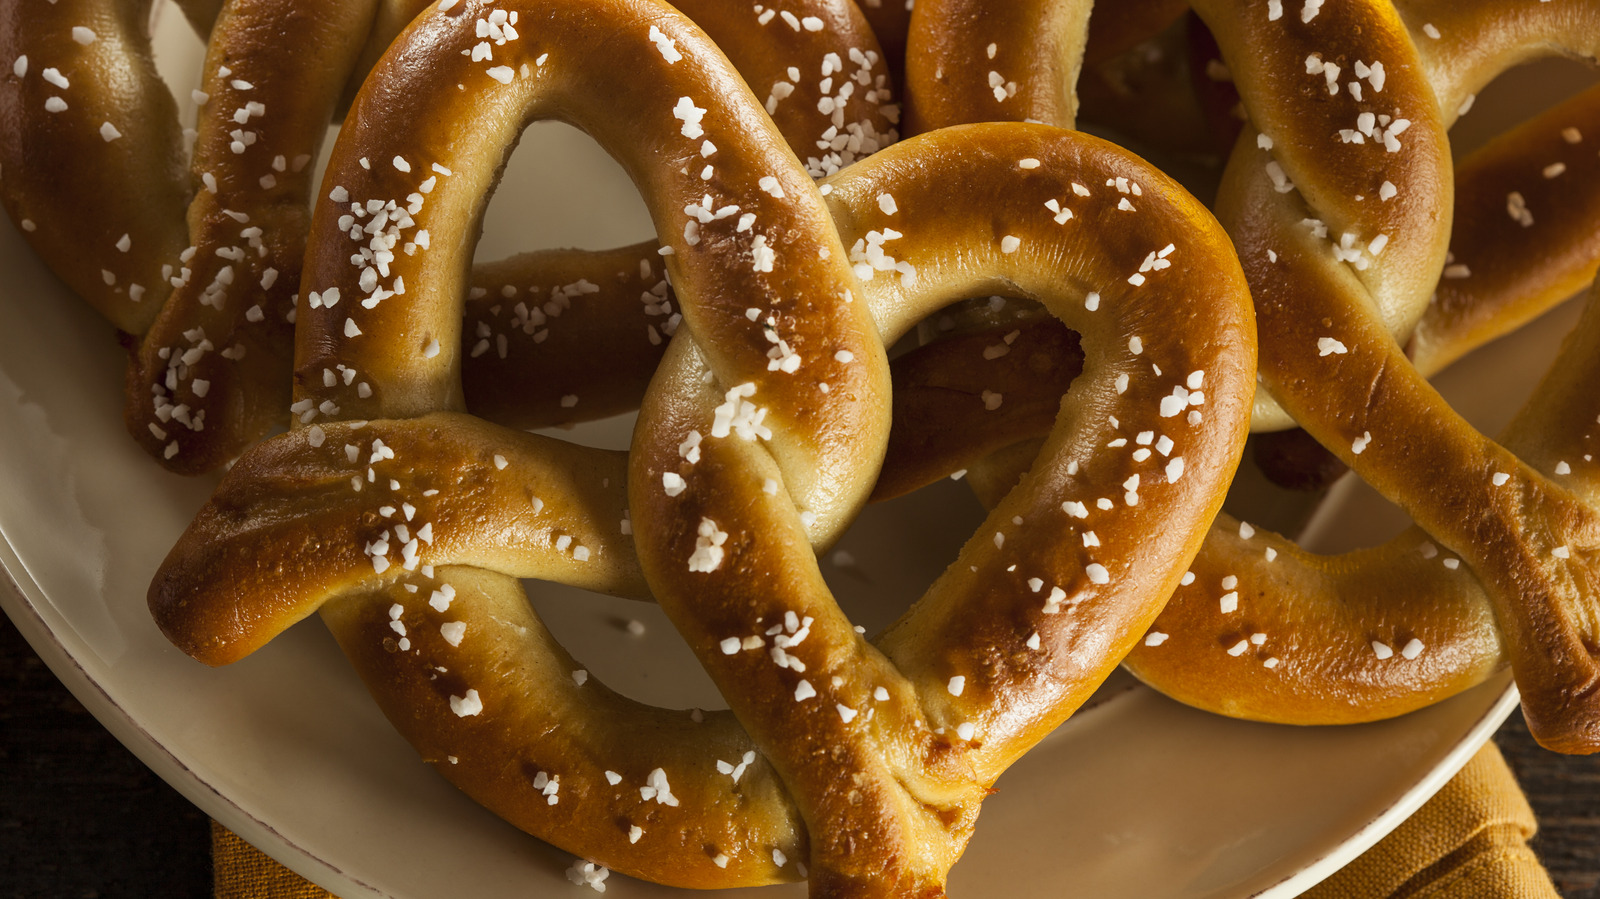 Does anyone know where I can find food grade lye for making pretzels? :  r/AskCulinary